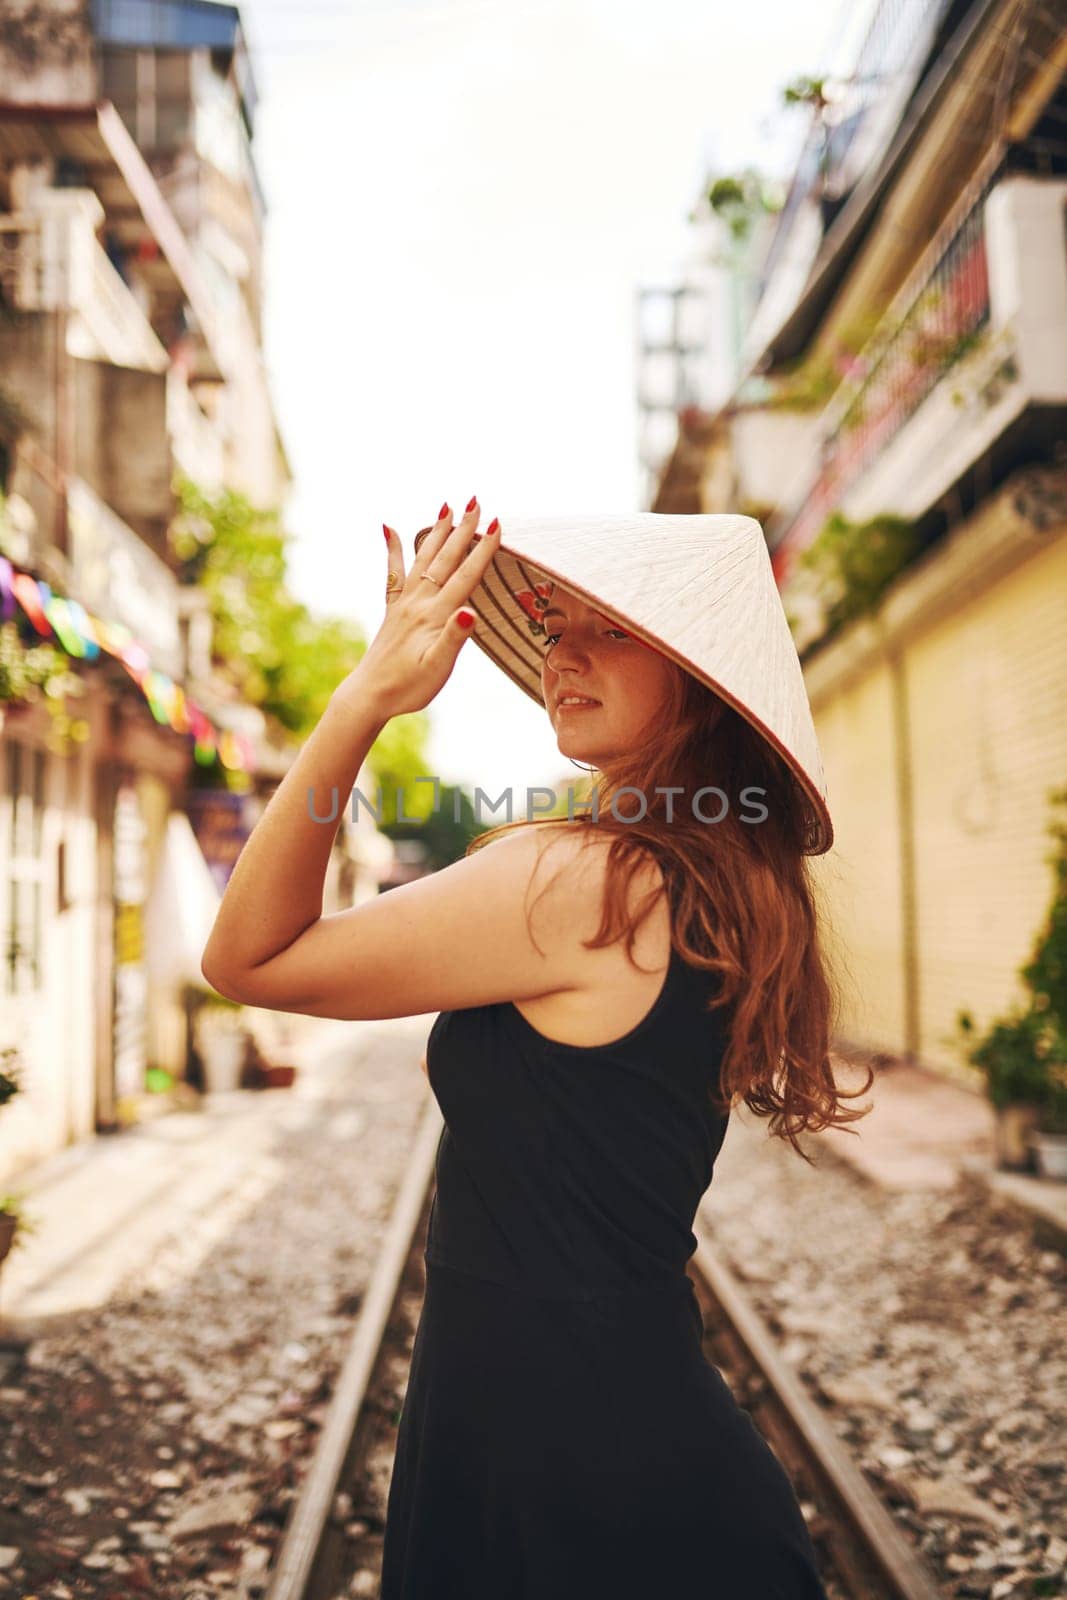 I use travel as an escape from daily life. a young woman wearing a conical hat while exploring a foreign city